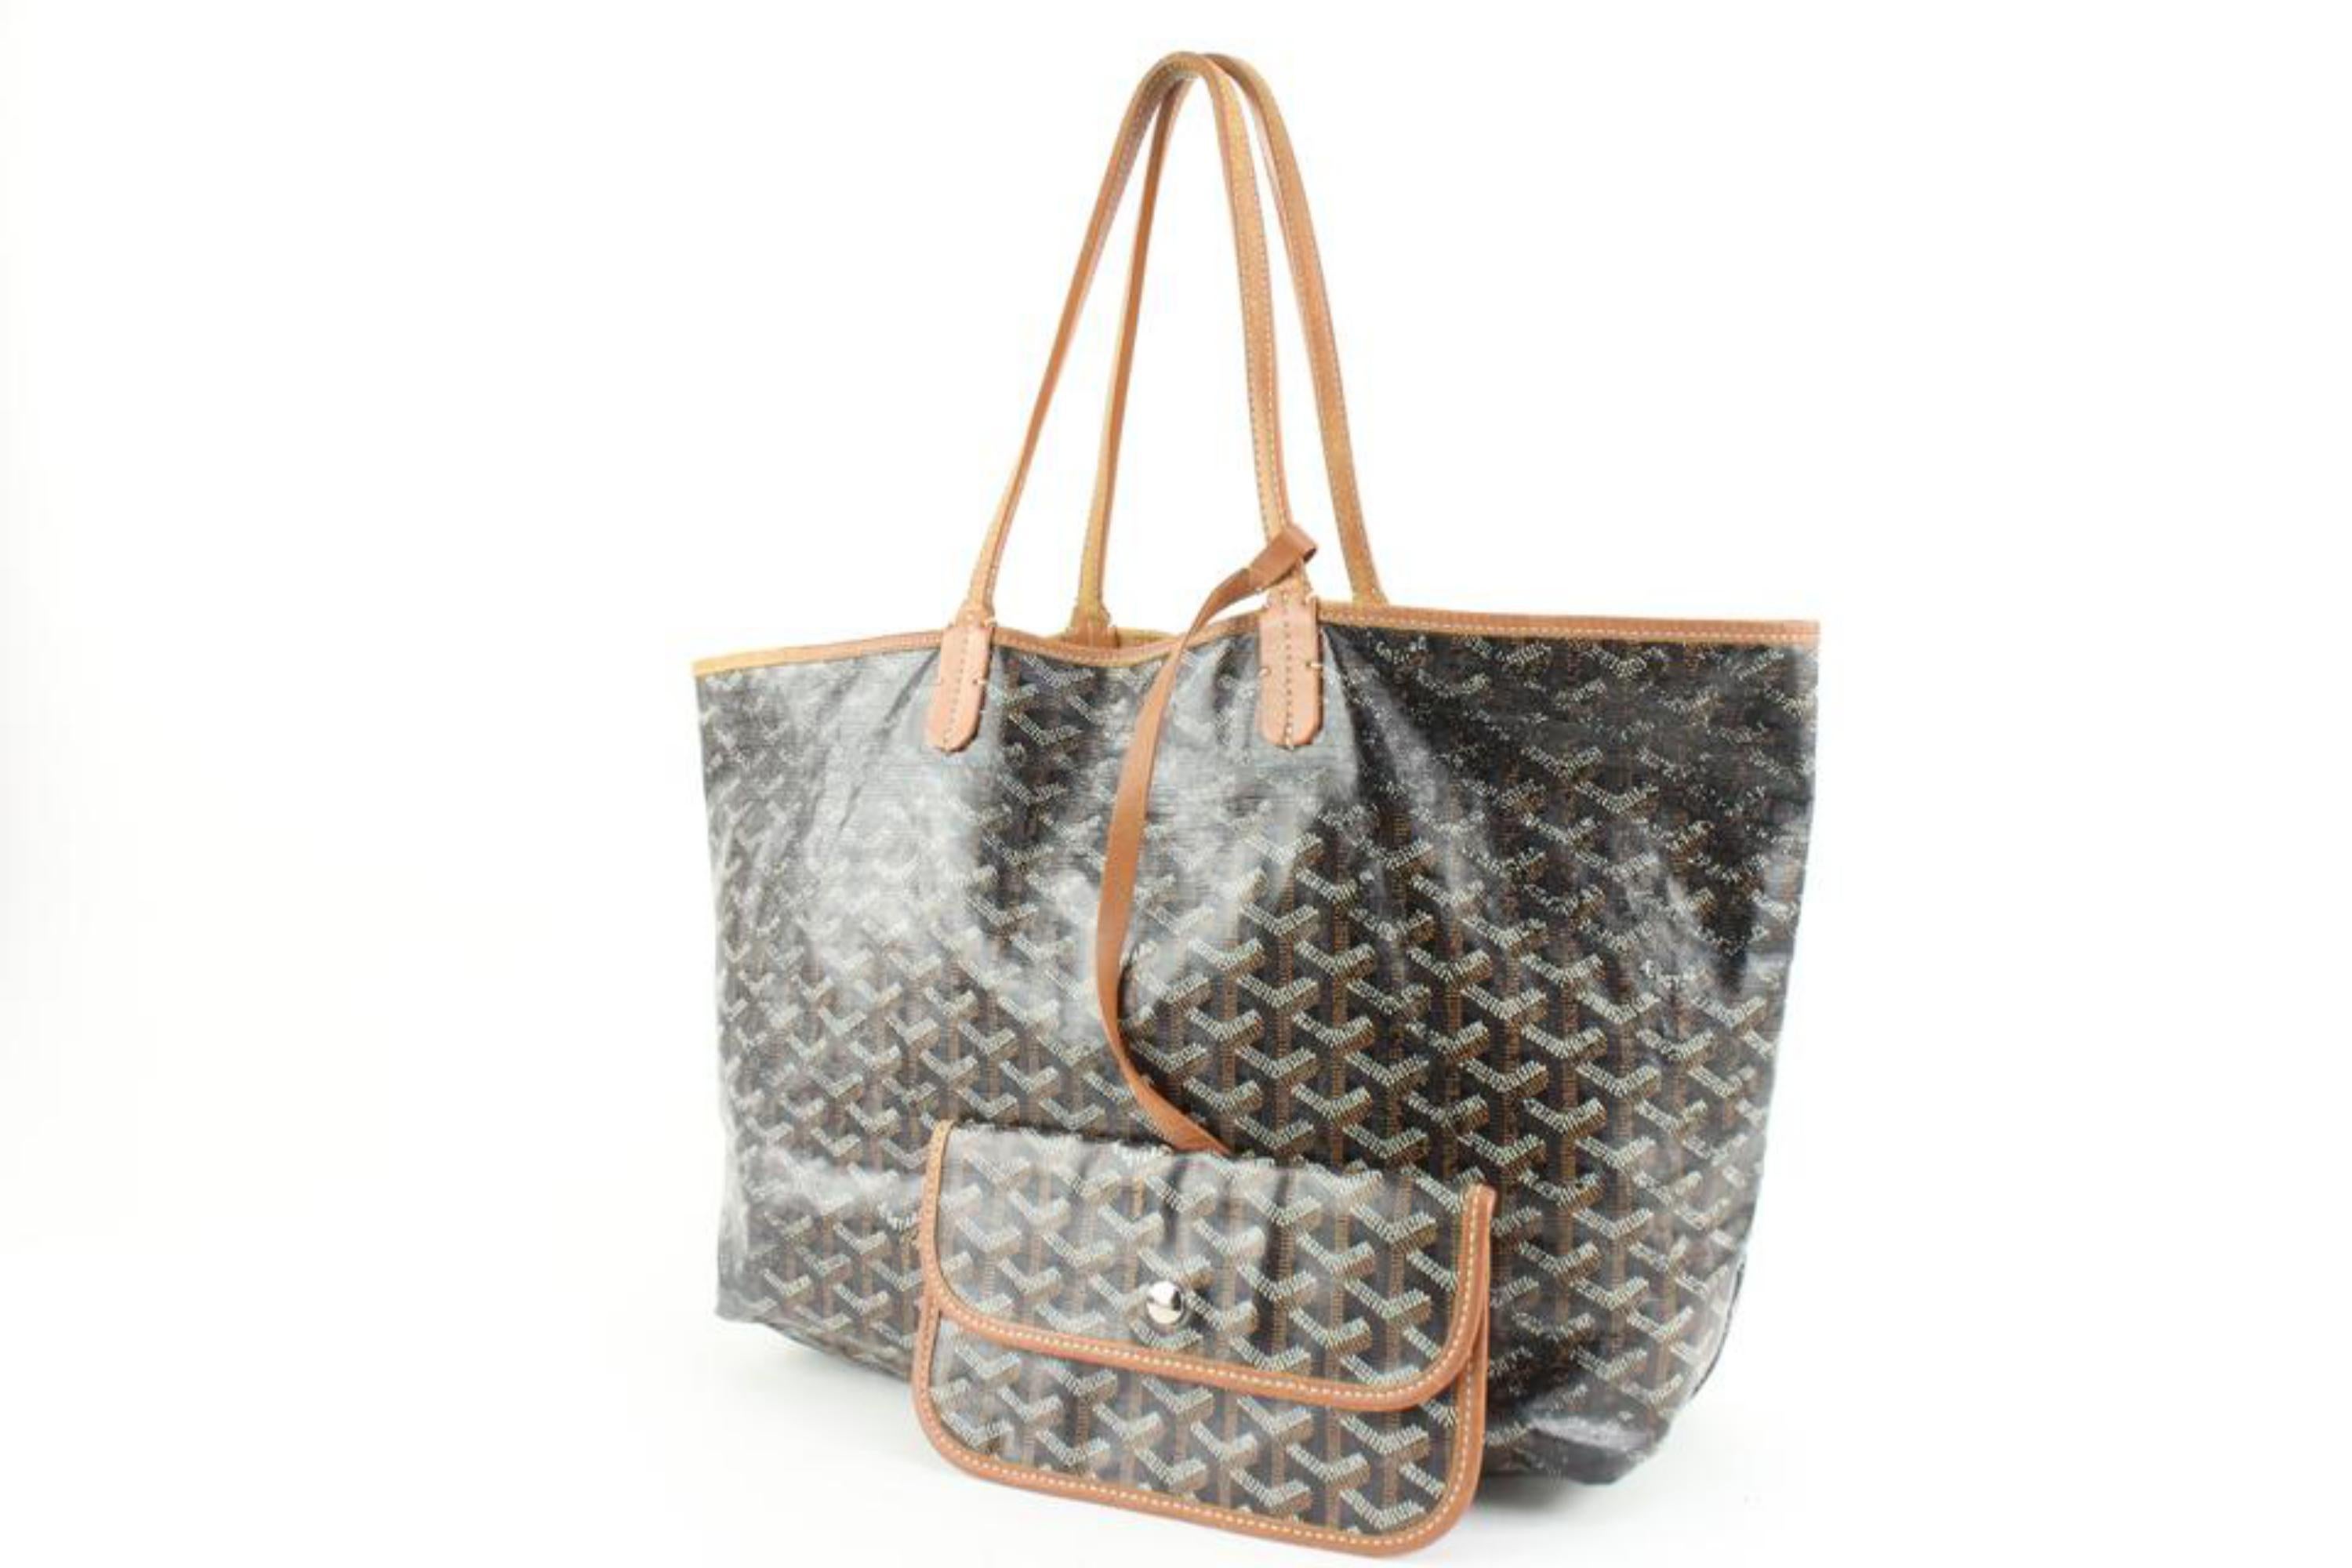 Goyard Black Chevron St Louis PM Tote Bag with Pouch 1GY48
Date Code/Serial Number: AAS020132
Made In: France
Measurements: Length:  18